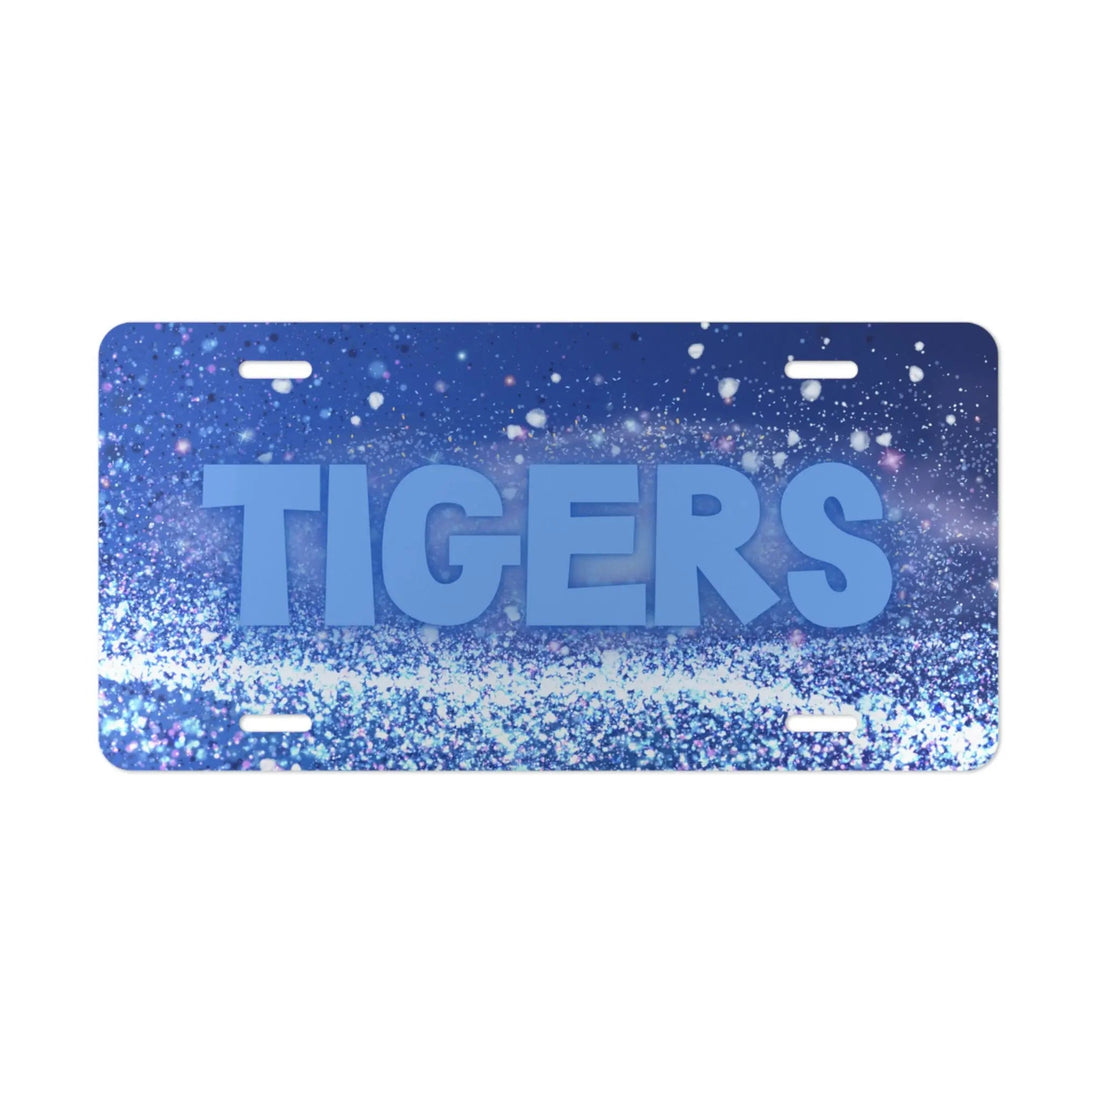 Tiger Glam License Plate - Accessories - Positively Sassy - Tiger Glam License Plate